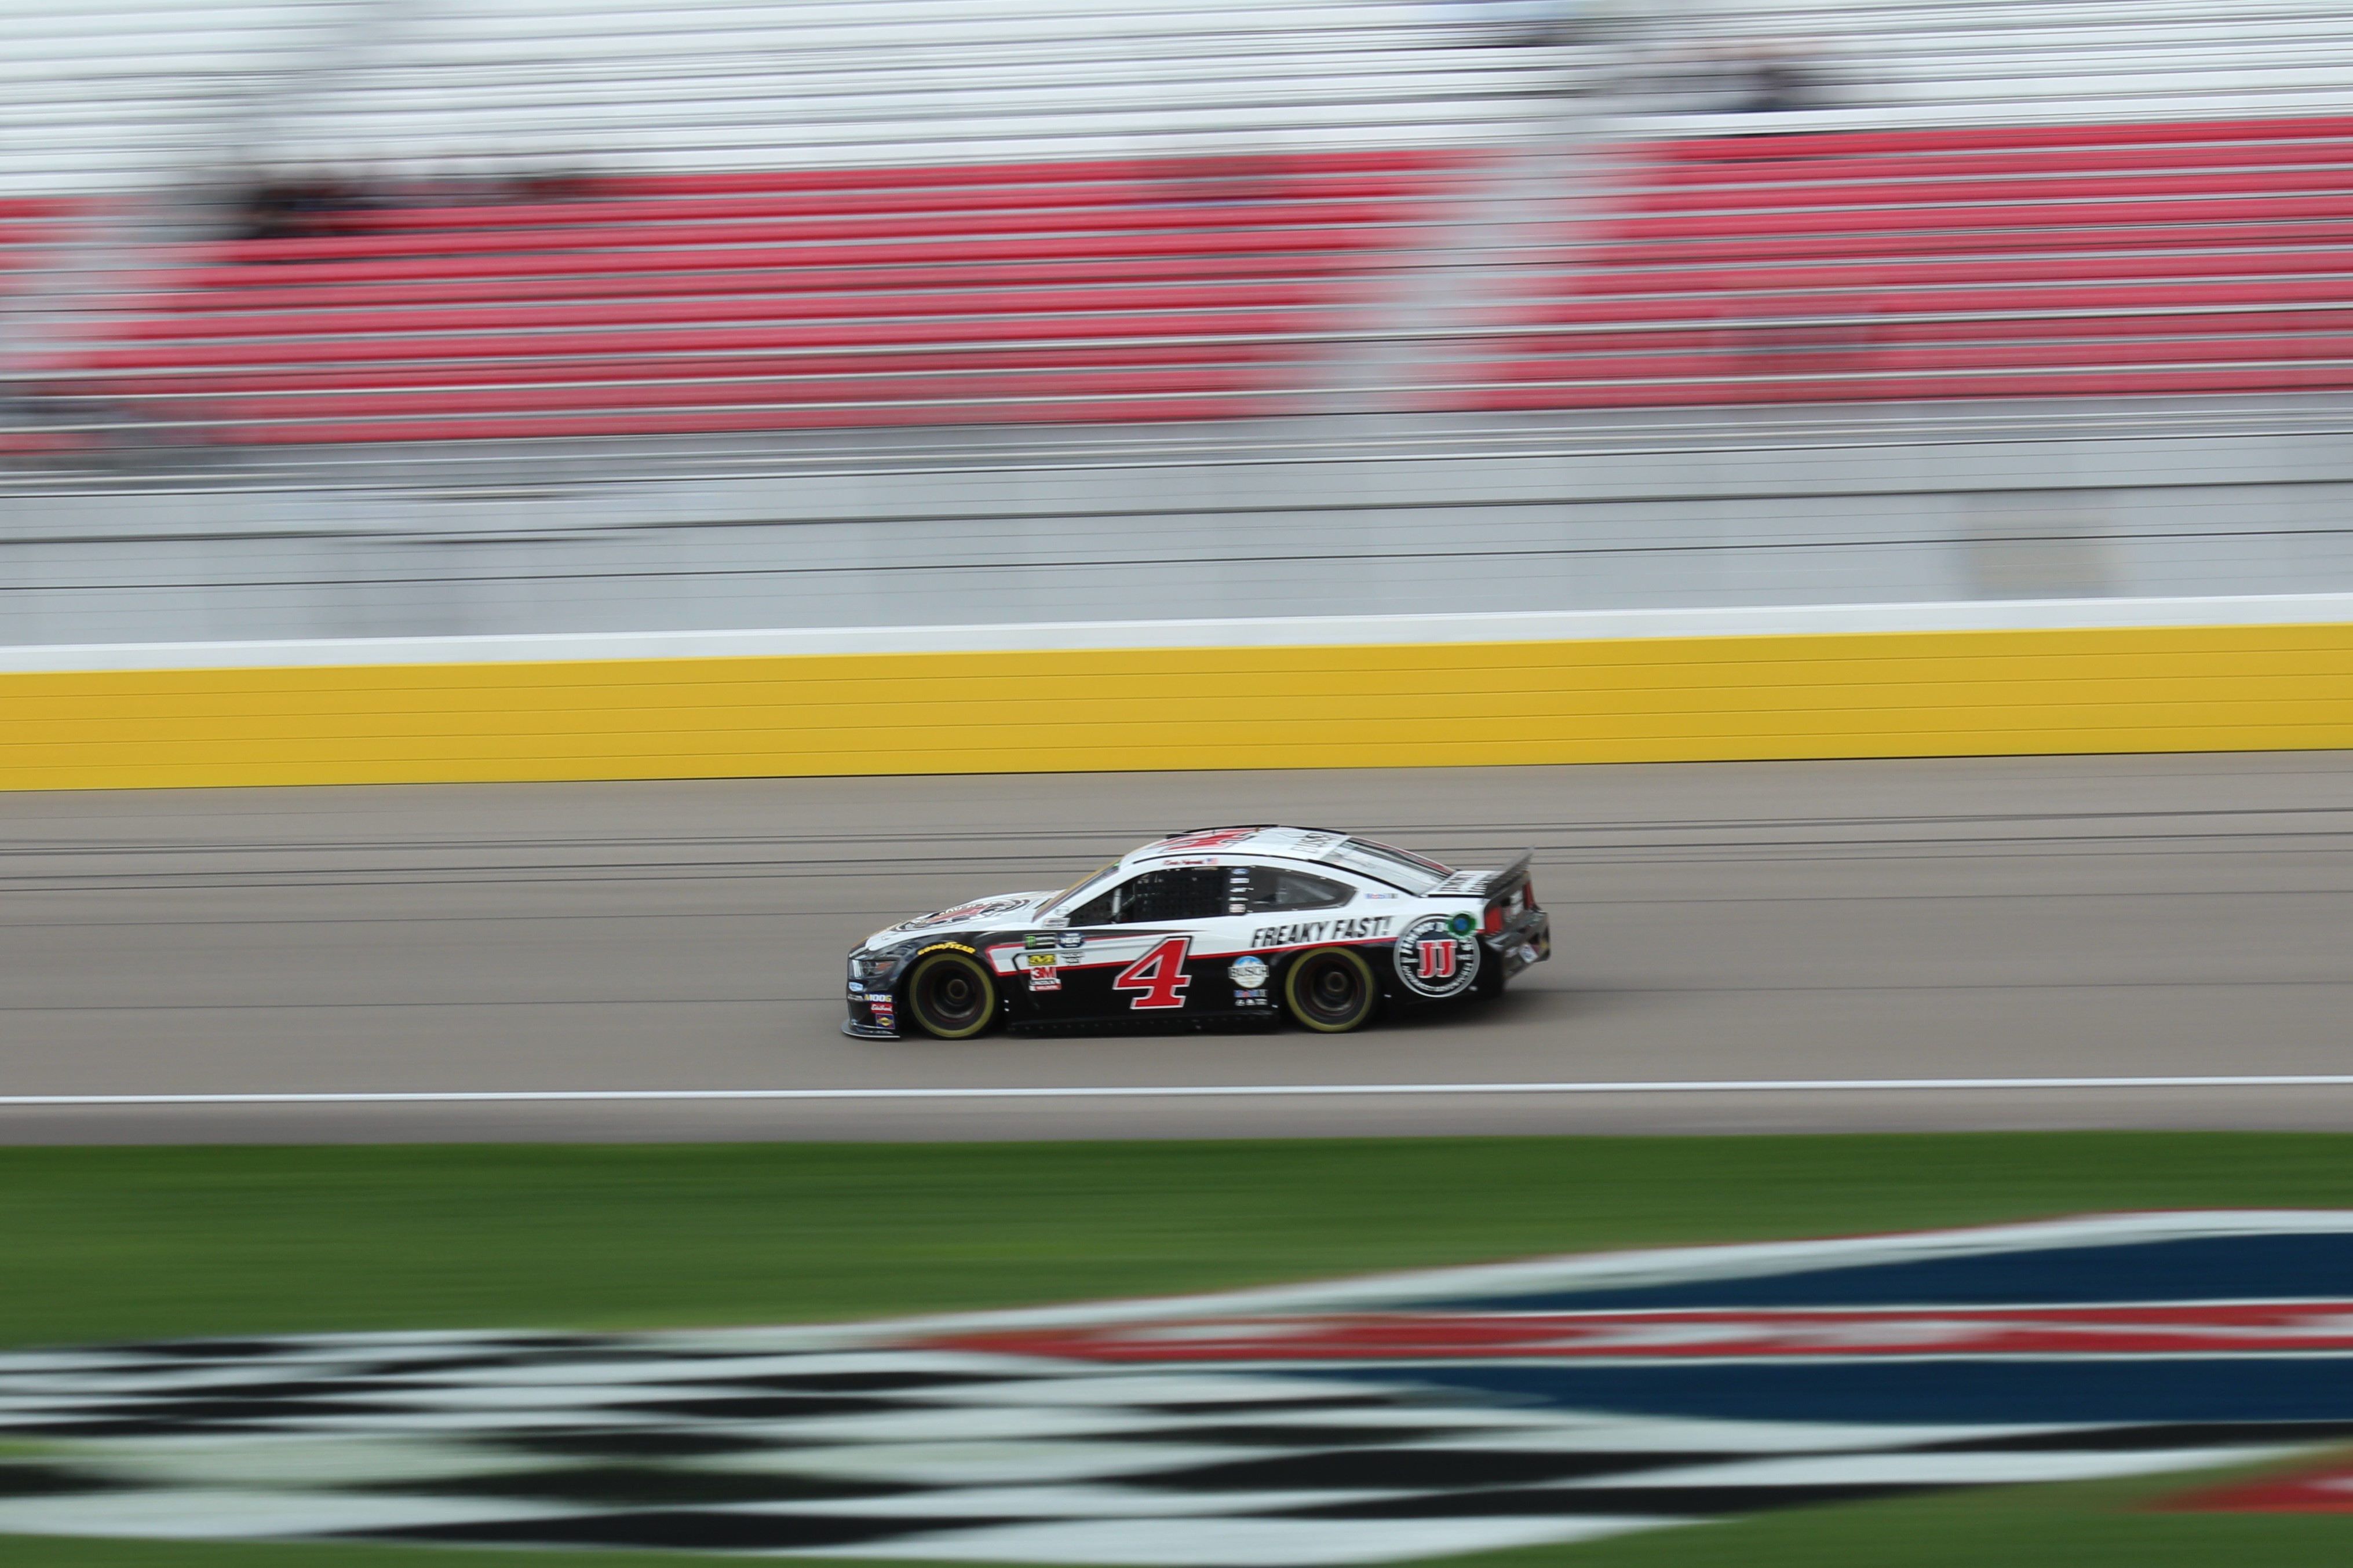 Kevin Harvick looks to add to his winning ways in today's Pennzoil 400 at Las Vegas. (Photo Credit: Jose L. Acero Jr/TPF)